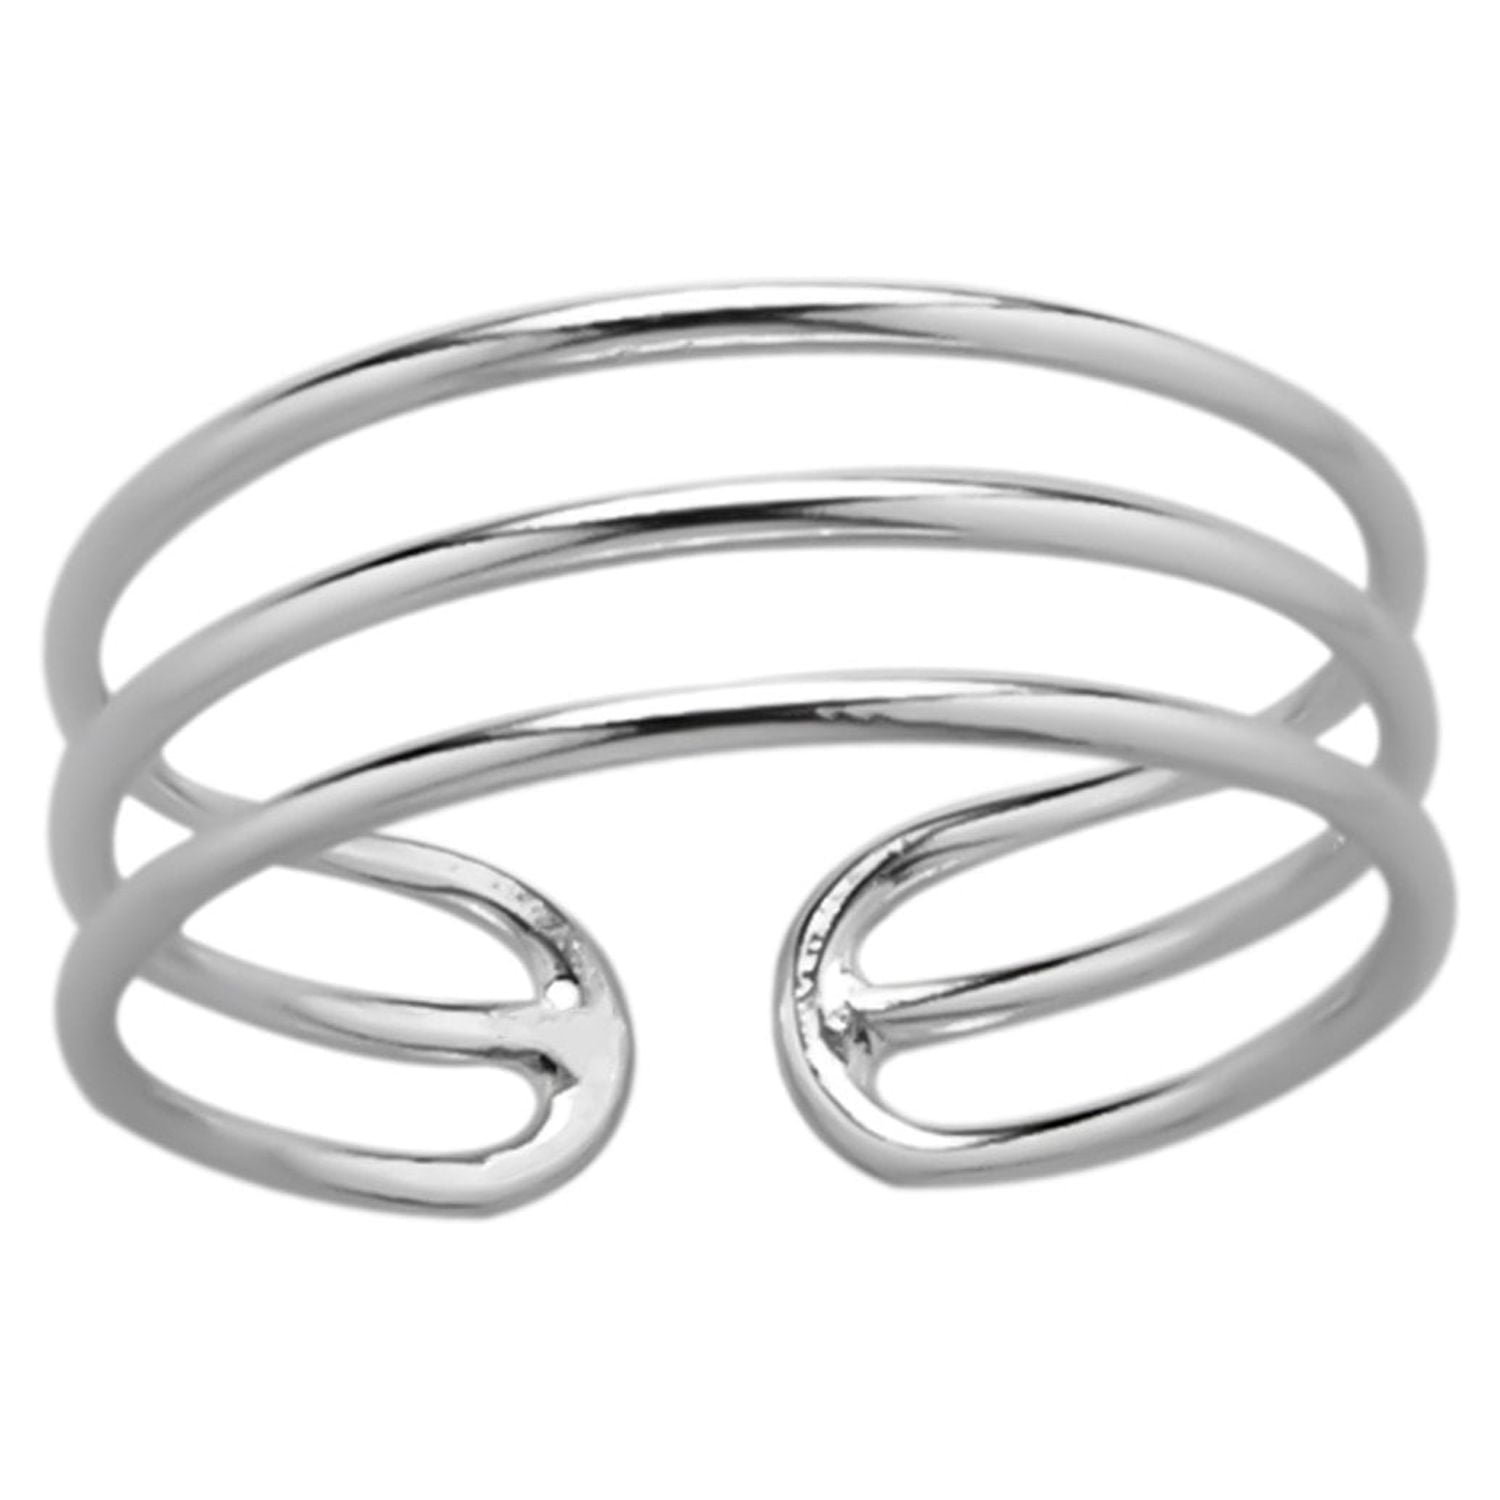 Enso Rings Thin Elements Series Silicone Ring - 7 - Diamond